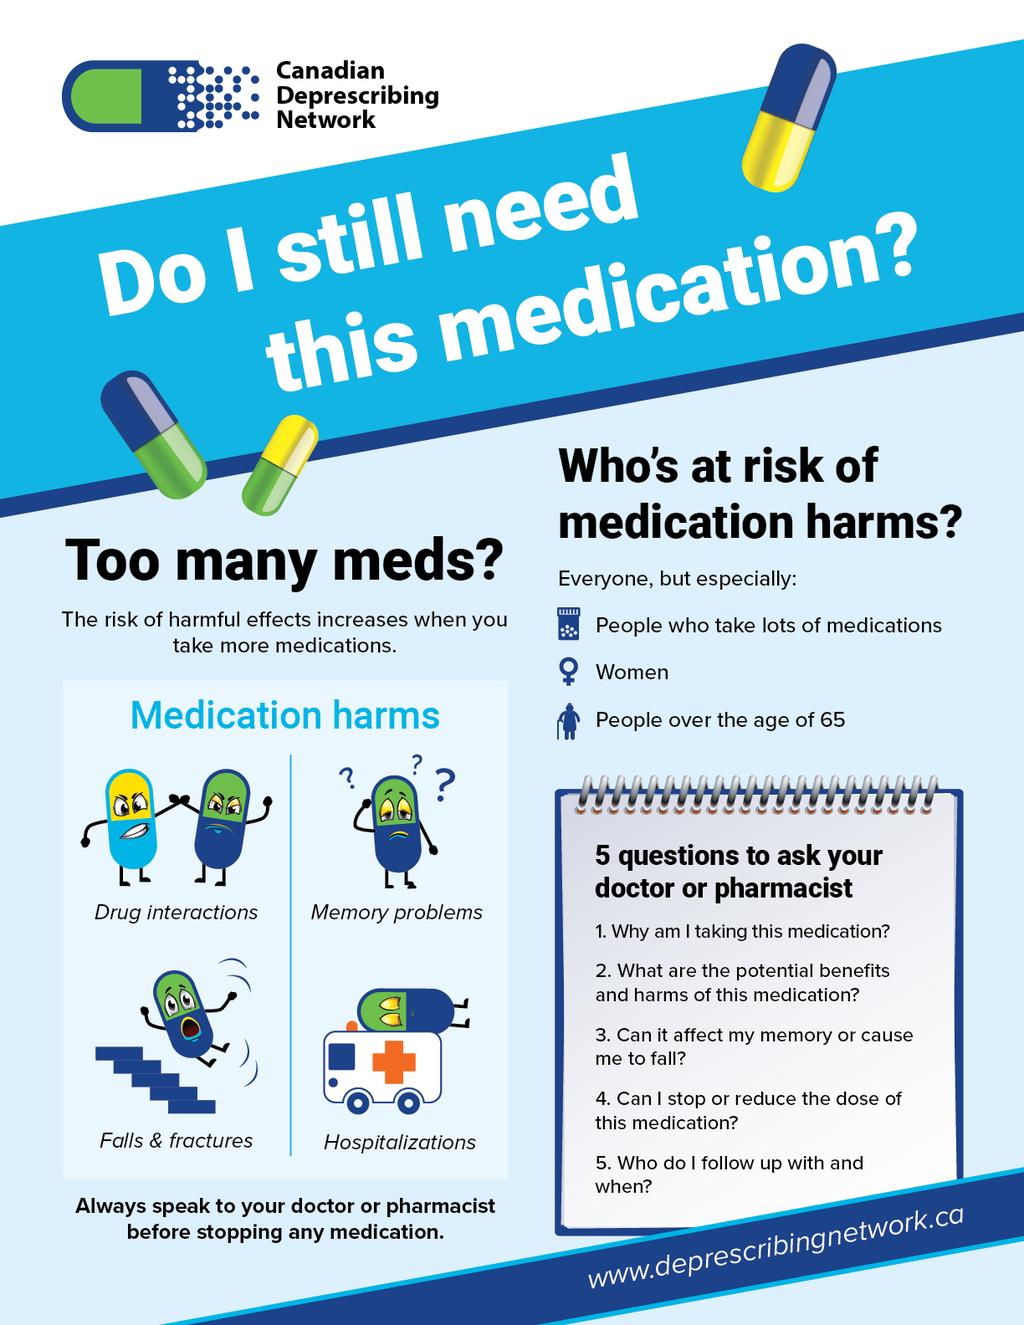 POSTER ON MEDICATION SAFETY Poster explaining the importance of medication safety and deprescribing to